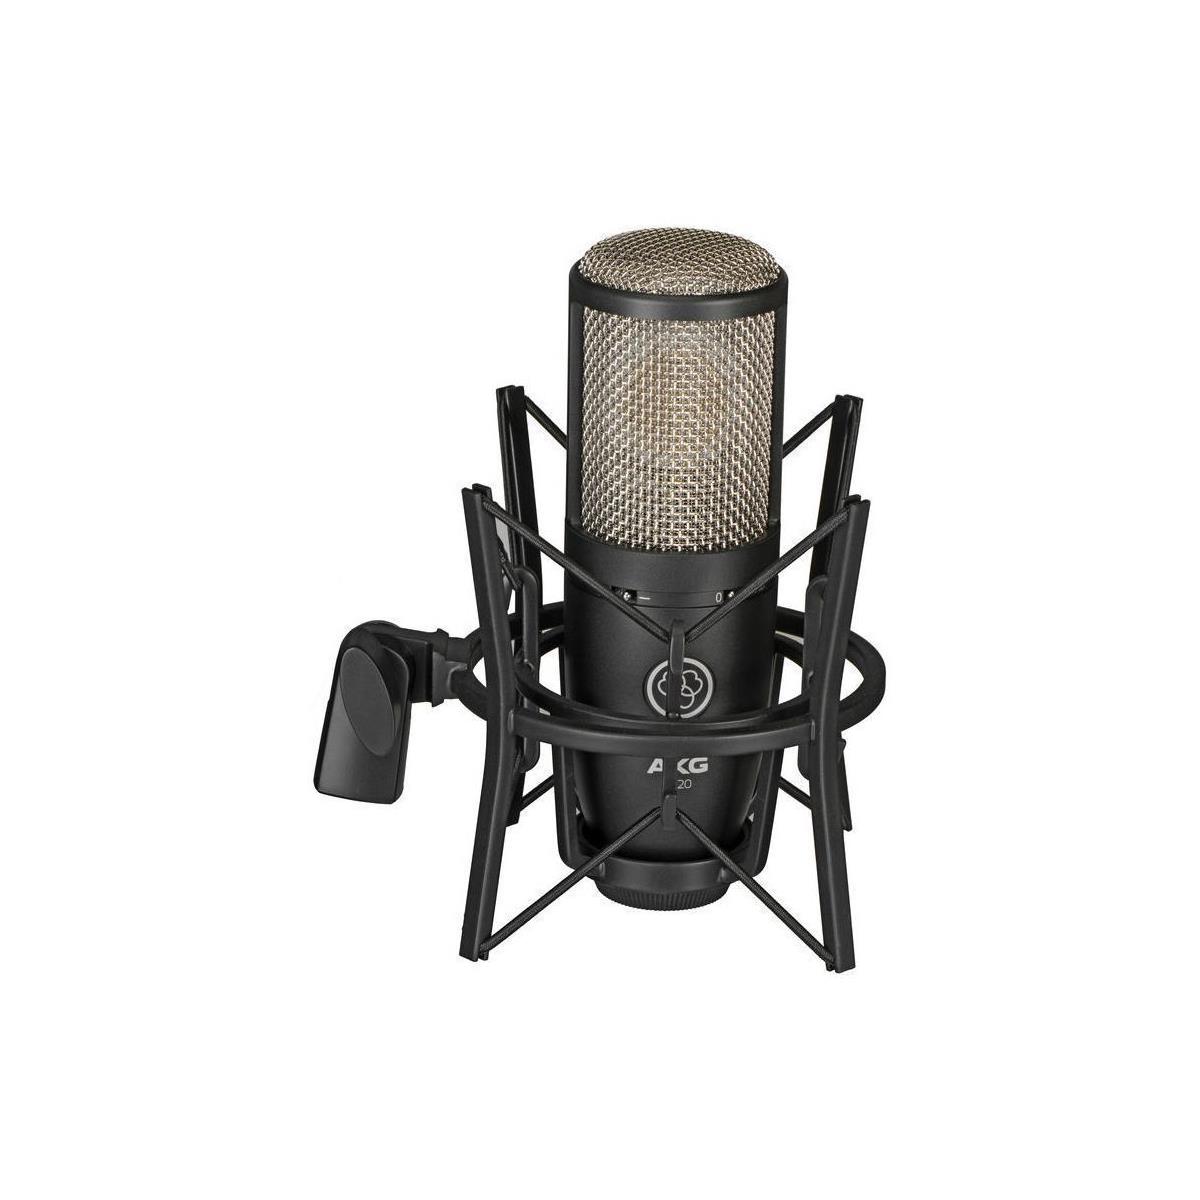 Image of AKG Project Studio P220 Large Diaphragm Condenser Microphone